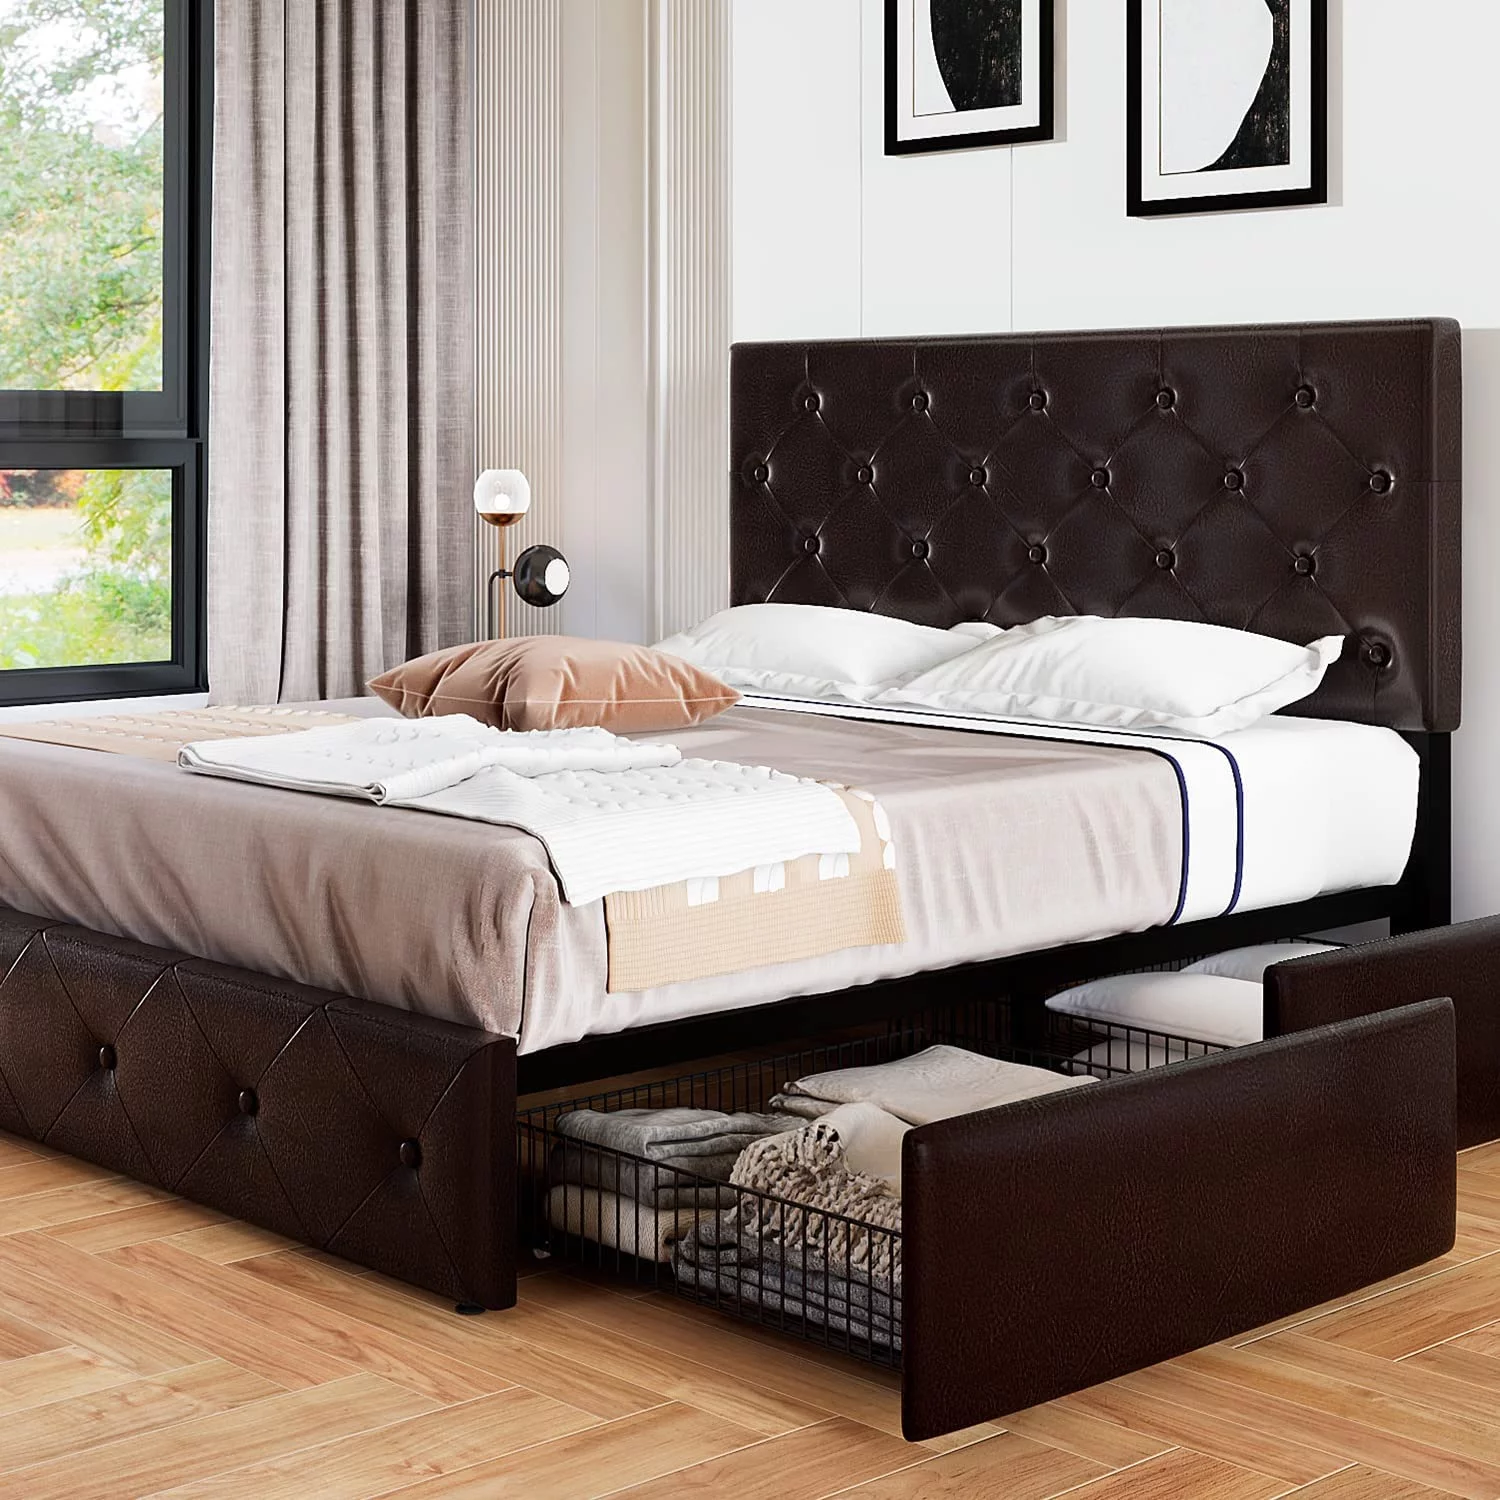 Allewie Black-brown Queen Size Platform Bed Frame with 4 Drawers, Diamond Stitched Button Tufted Faux Leather Upholstered